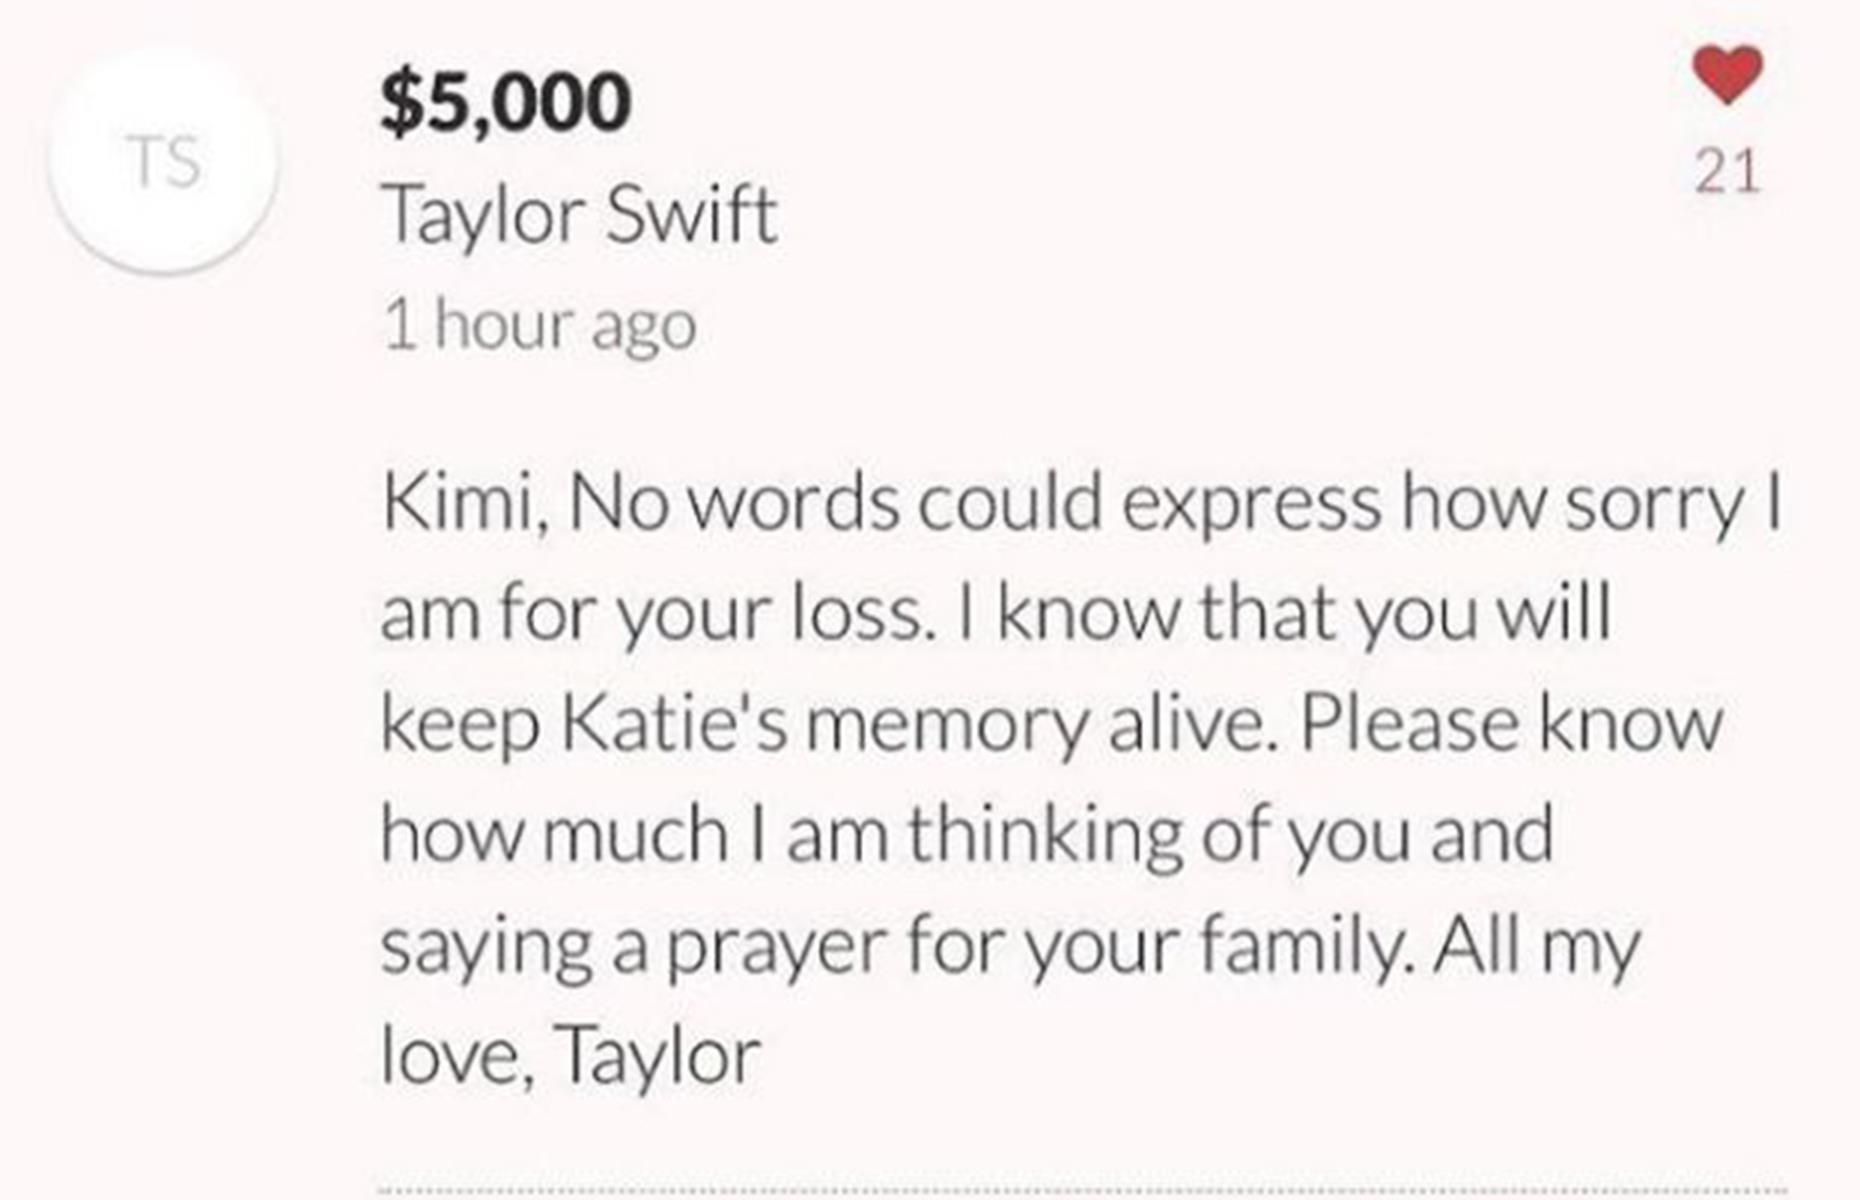 Taylor Swift gives out generous gifts and donations to fans